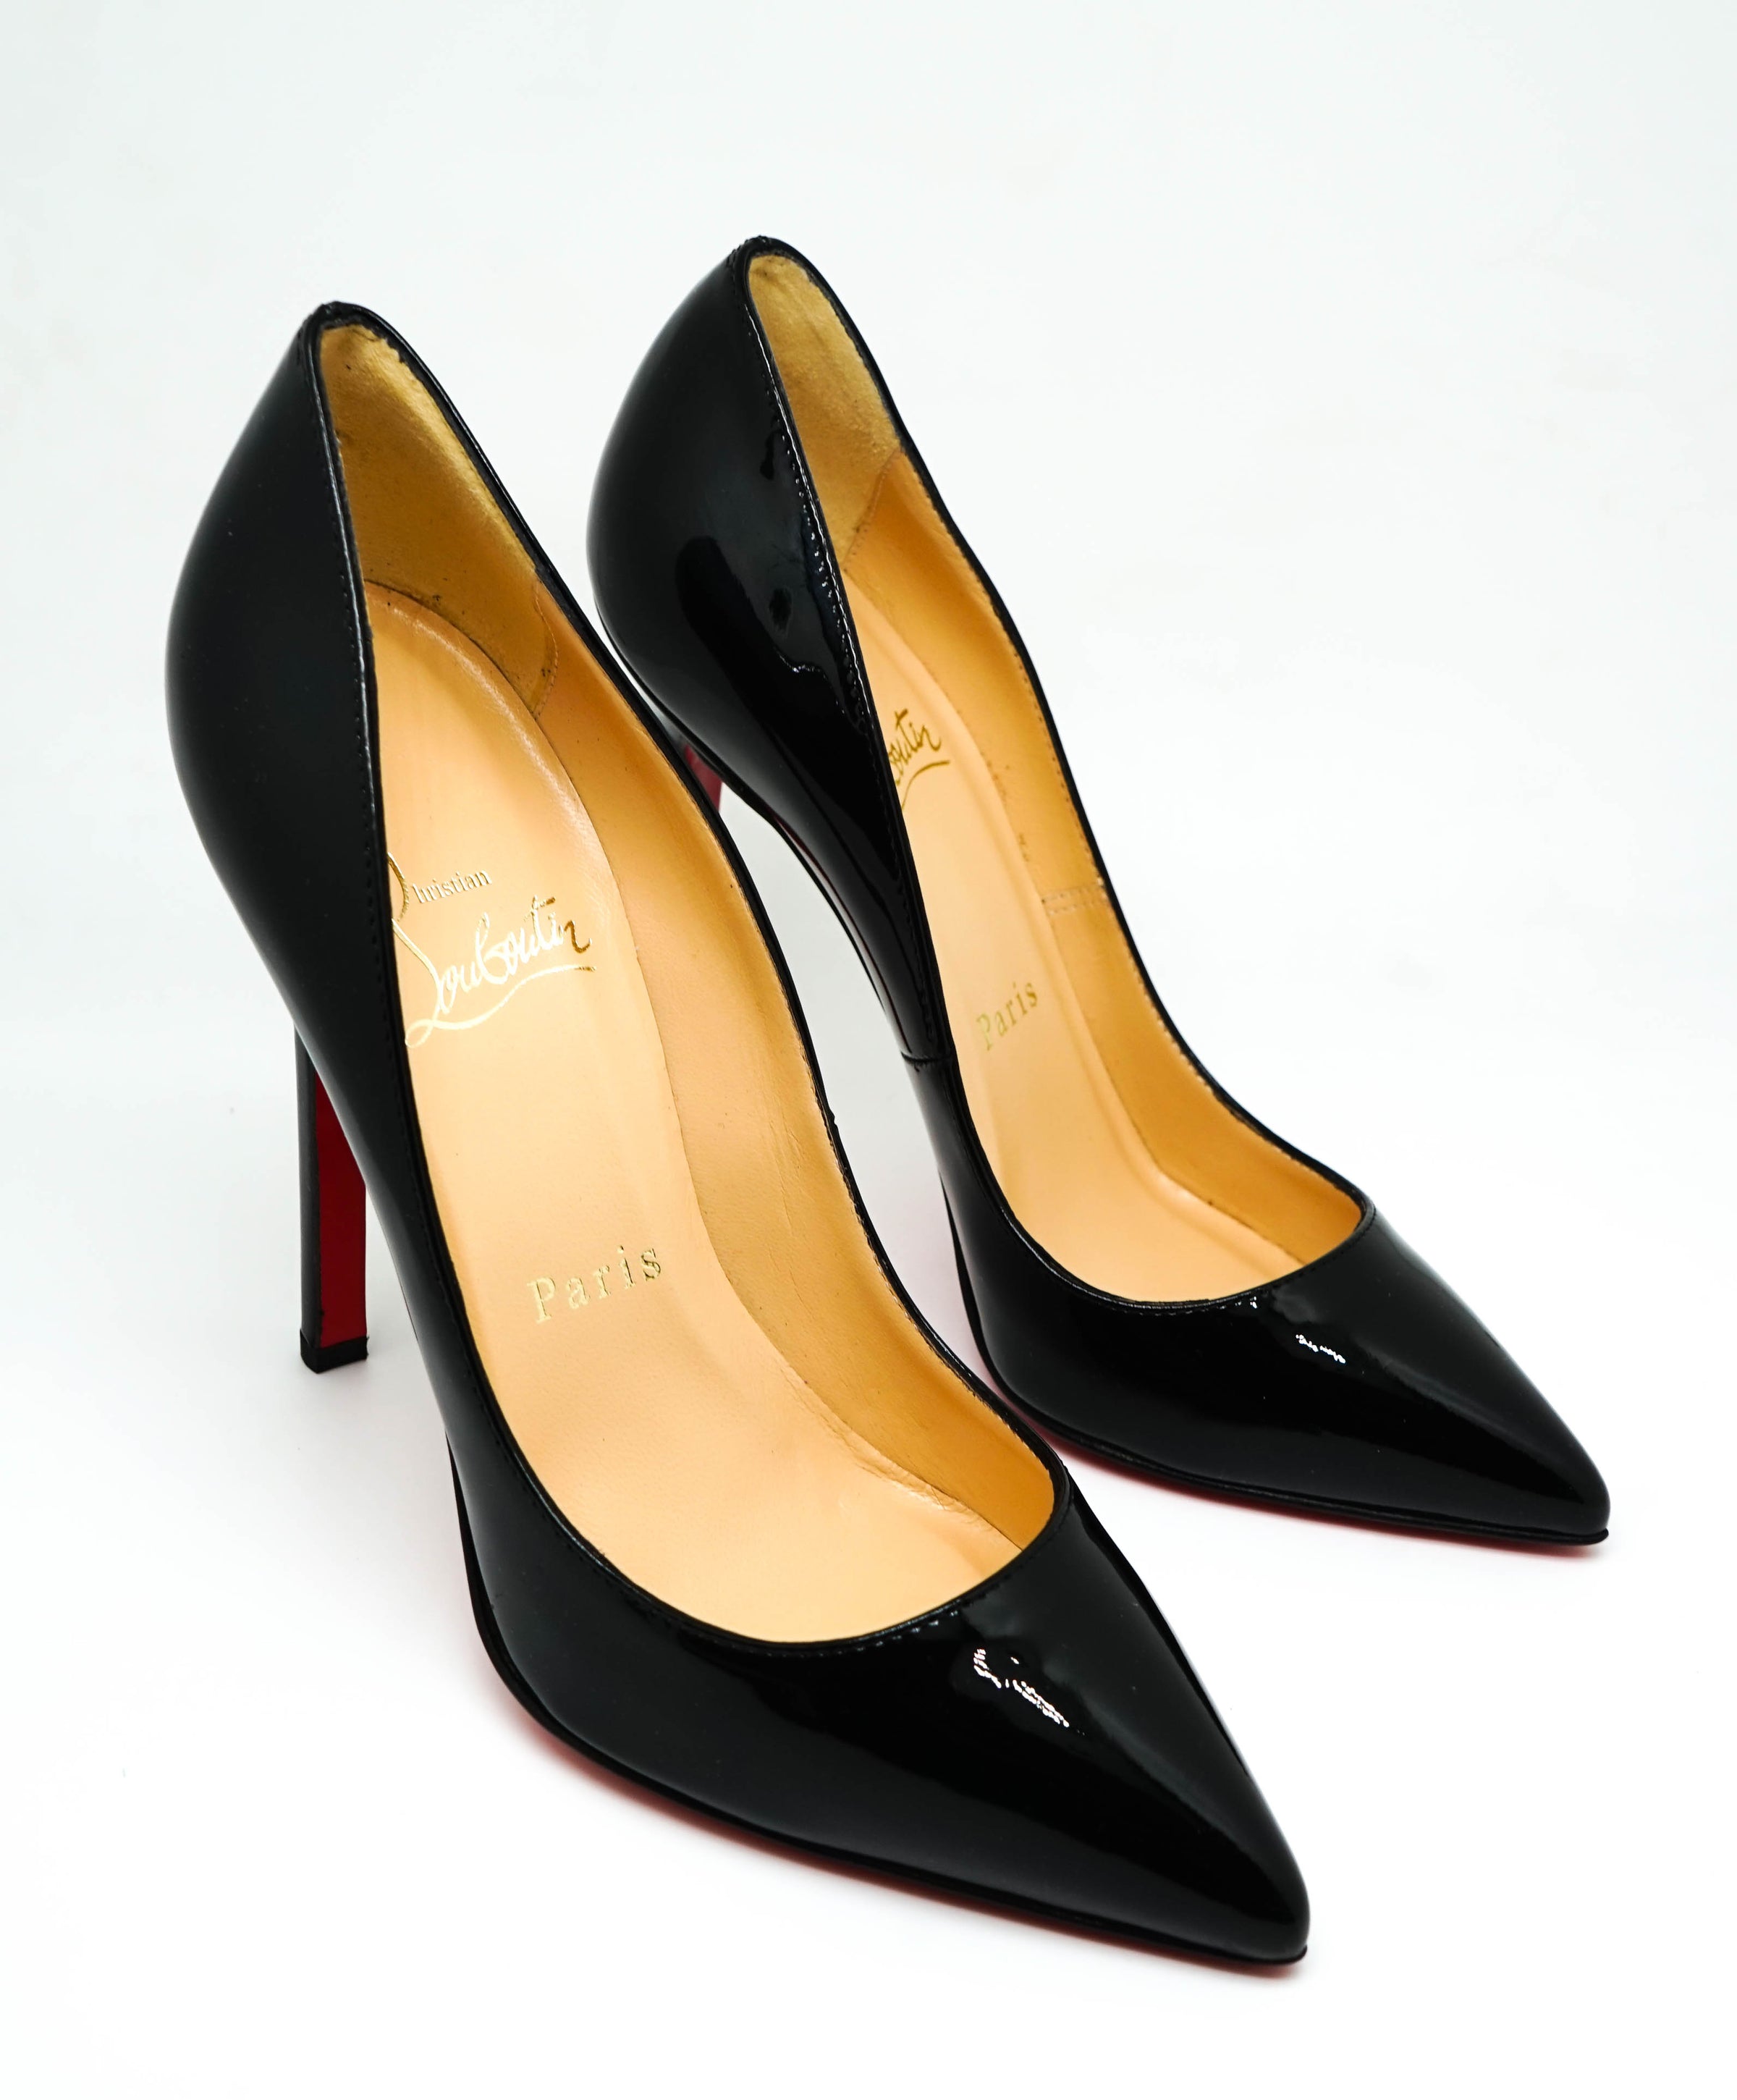 So Kate - 120 mm Pumps - Patent calf leather - Black - Christian Louboutin